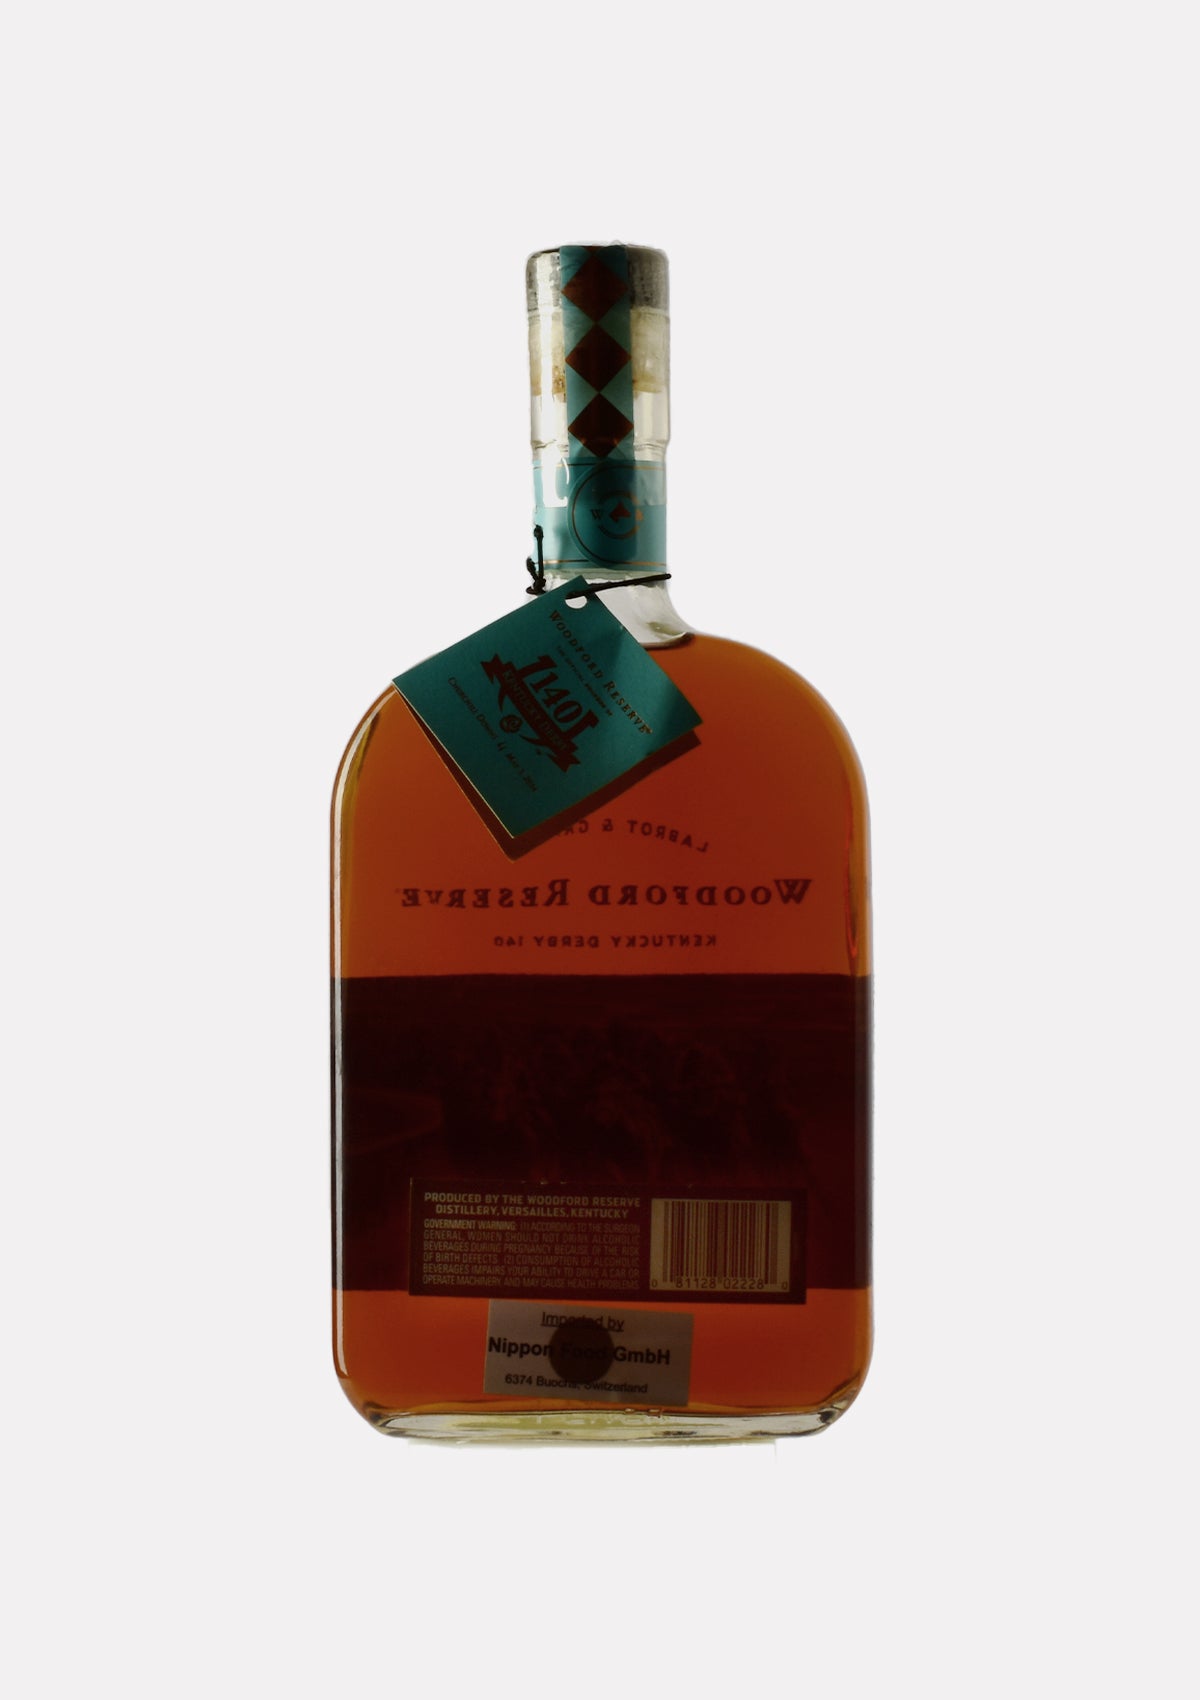 Woodford Reserve 140 Kentucky Derby